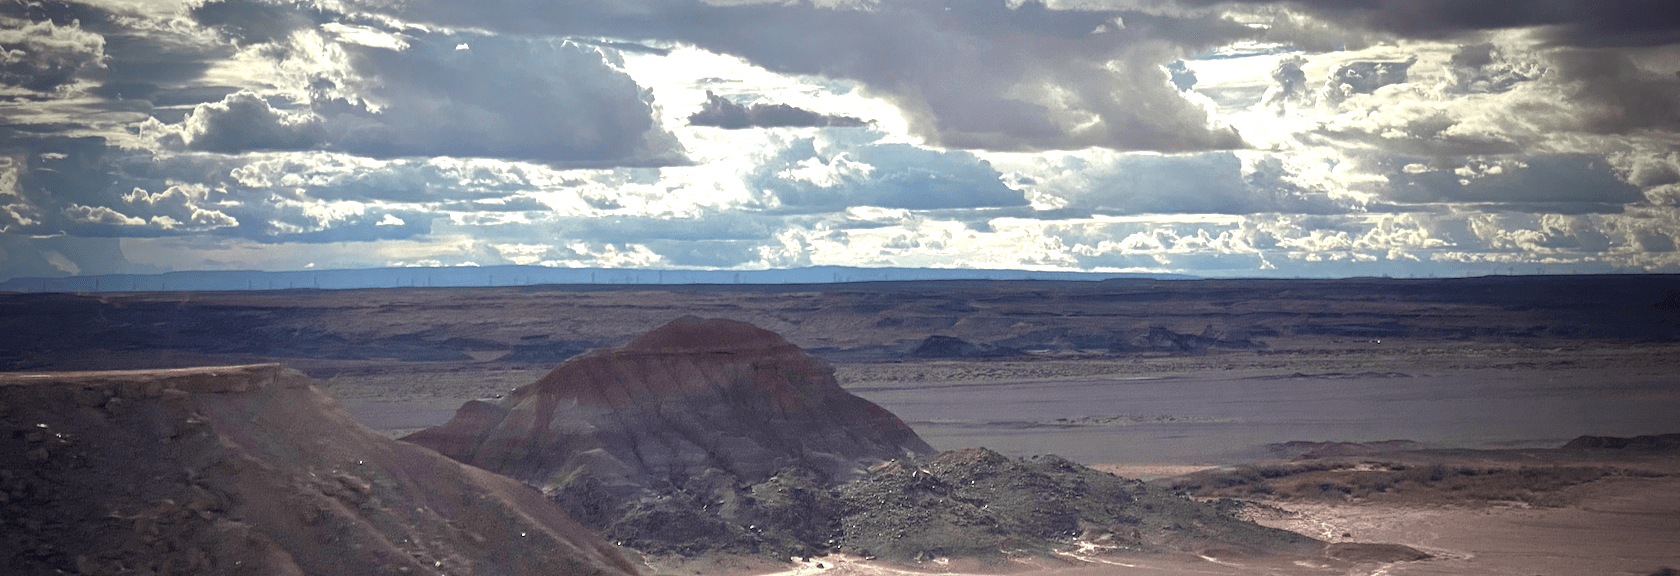 A desolate desert view with mountains of gravel and sand, below a cloudy sky